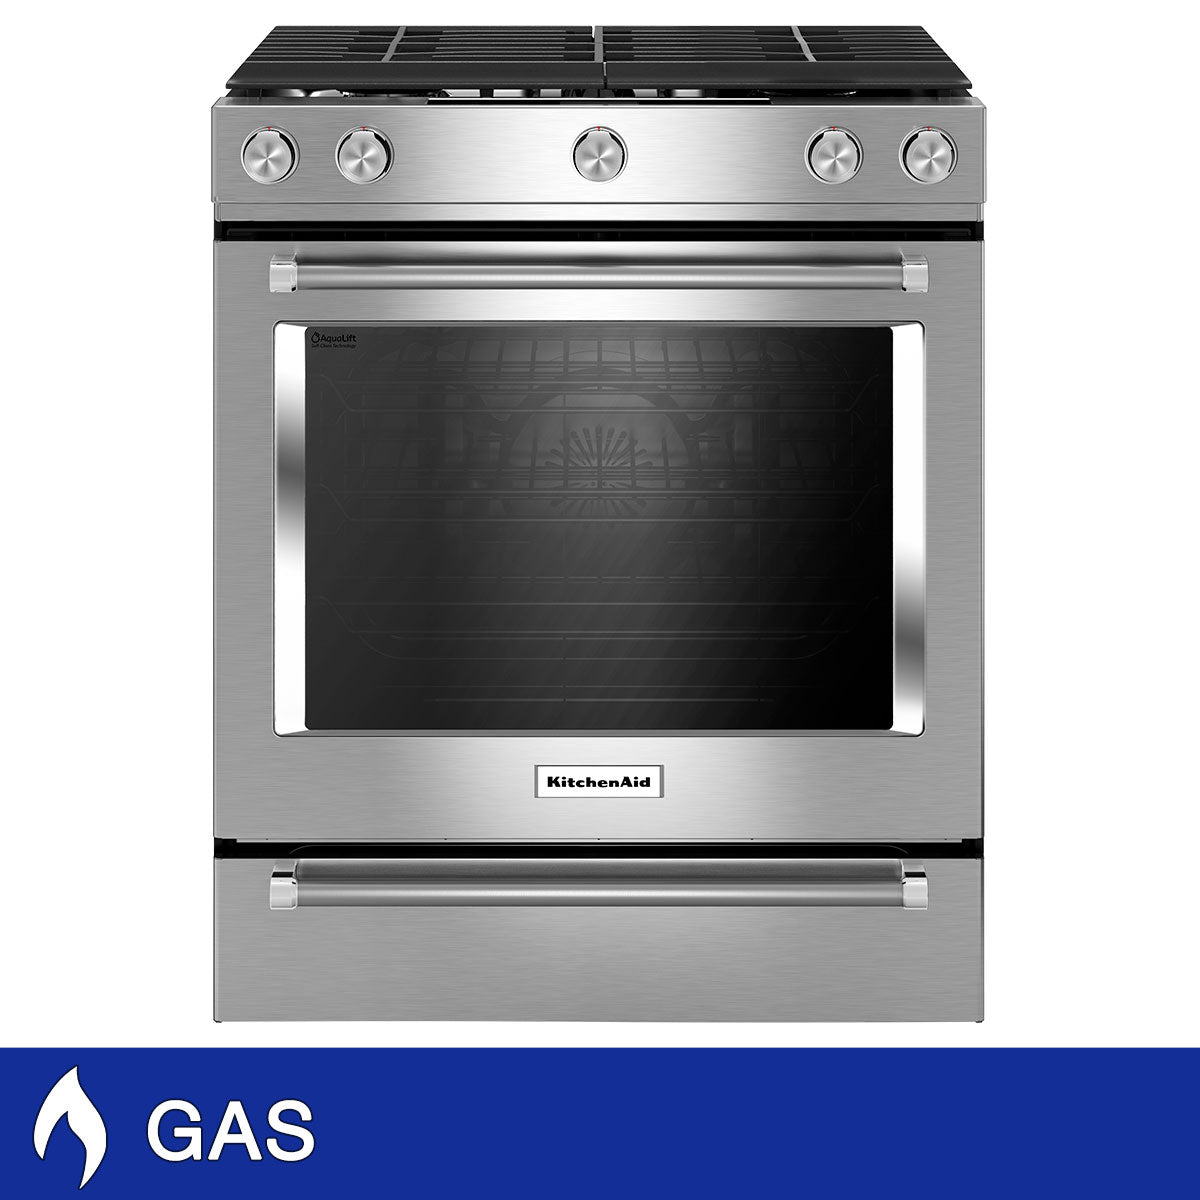 KitchenAid 5.8 cu. ft. Slide-In GAS Convection Range with Steam Rack Image